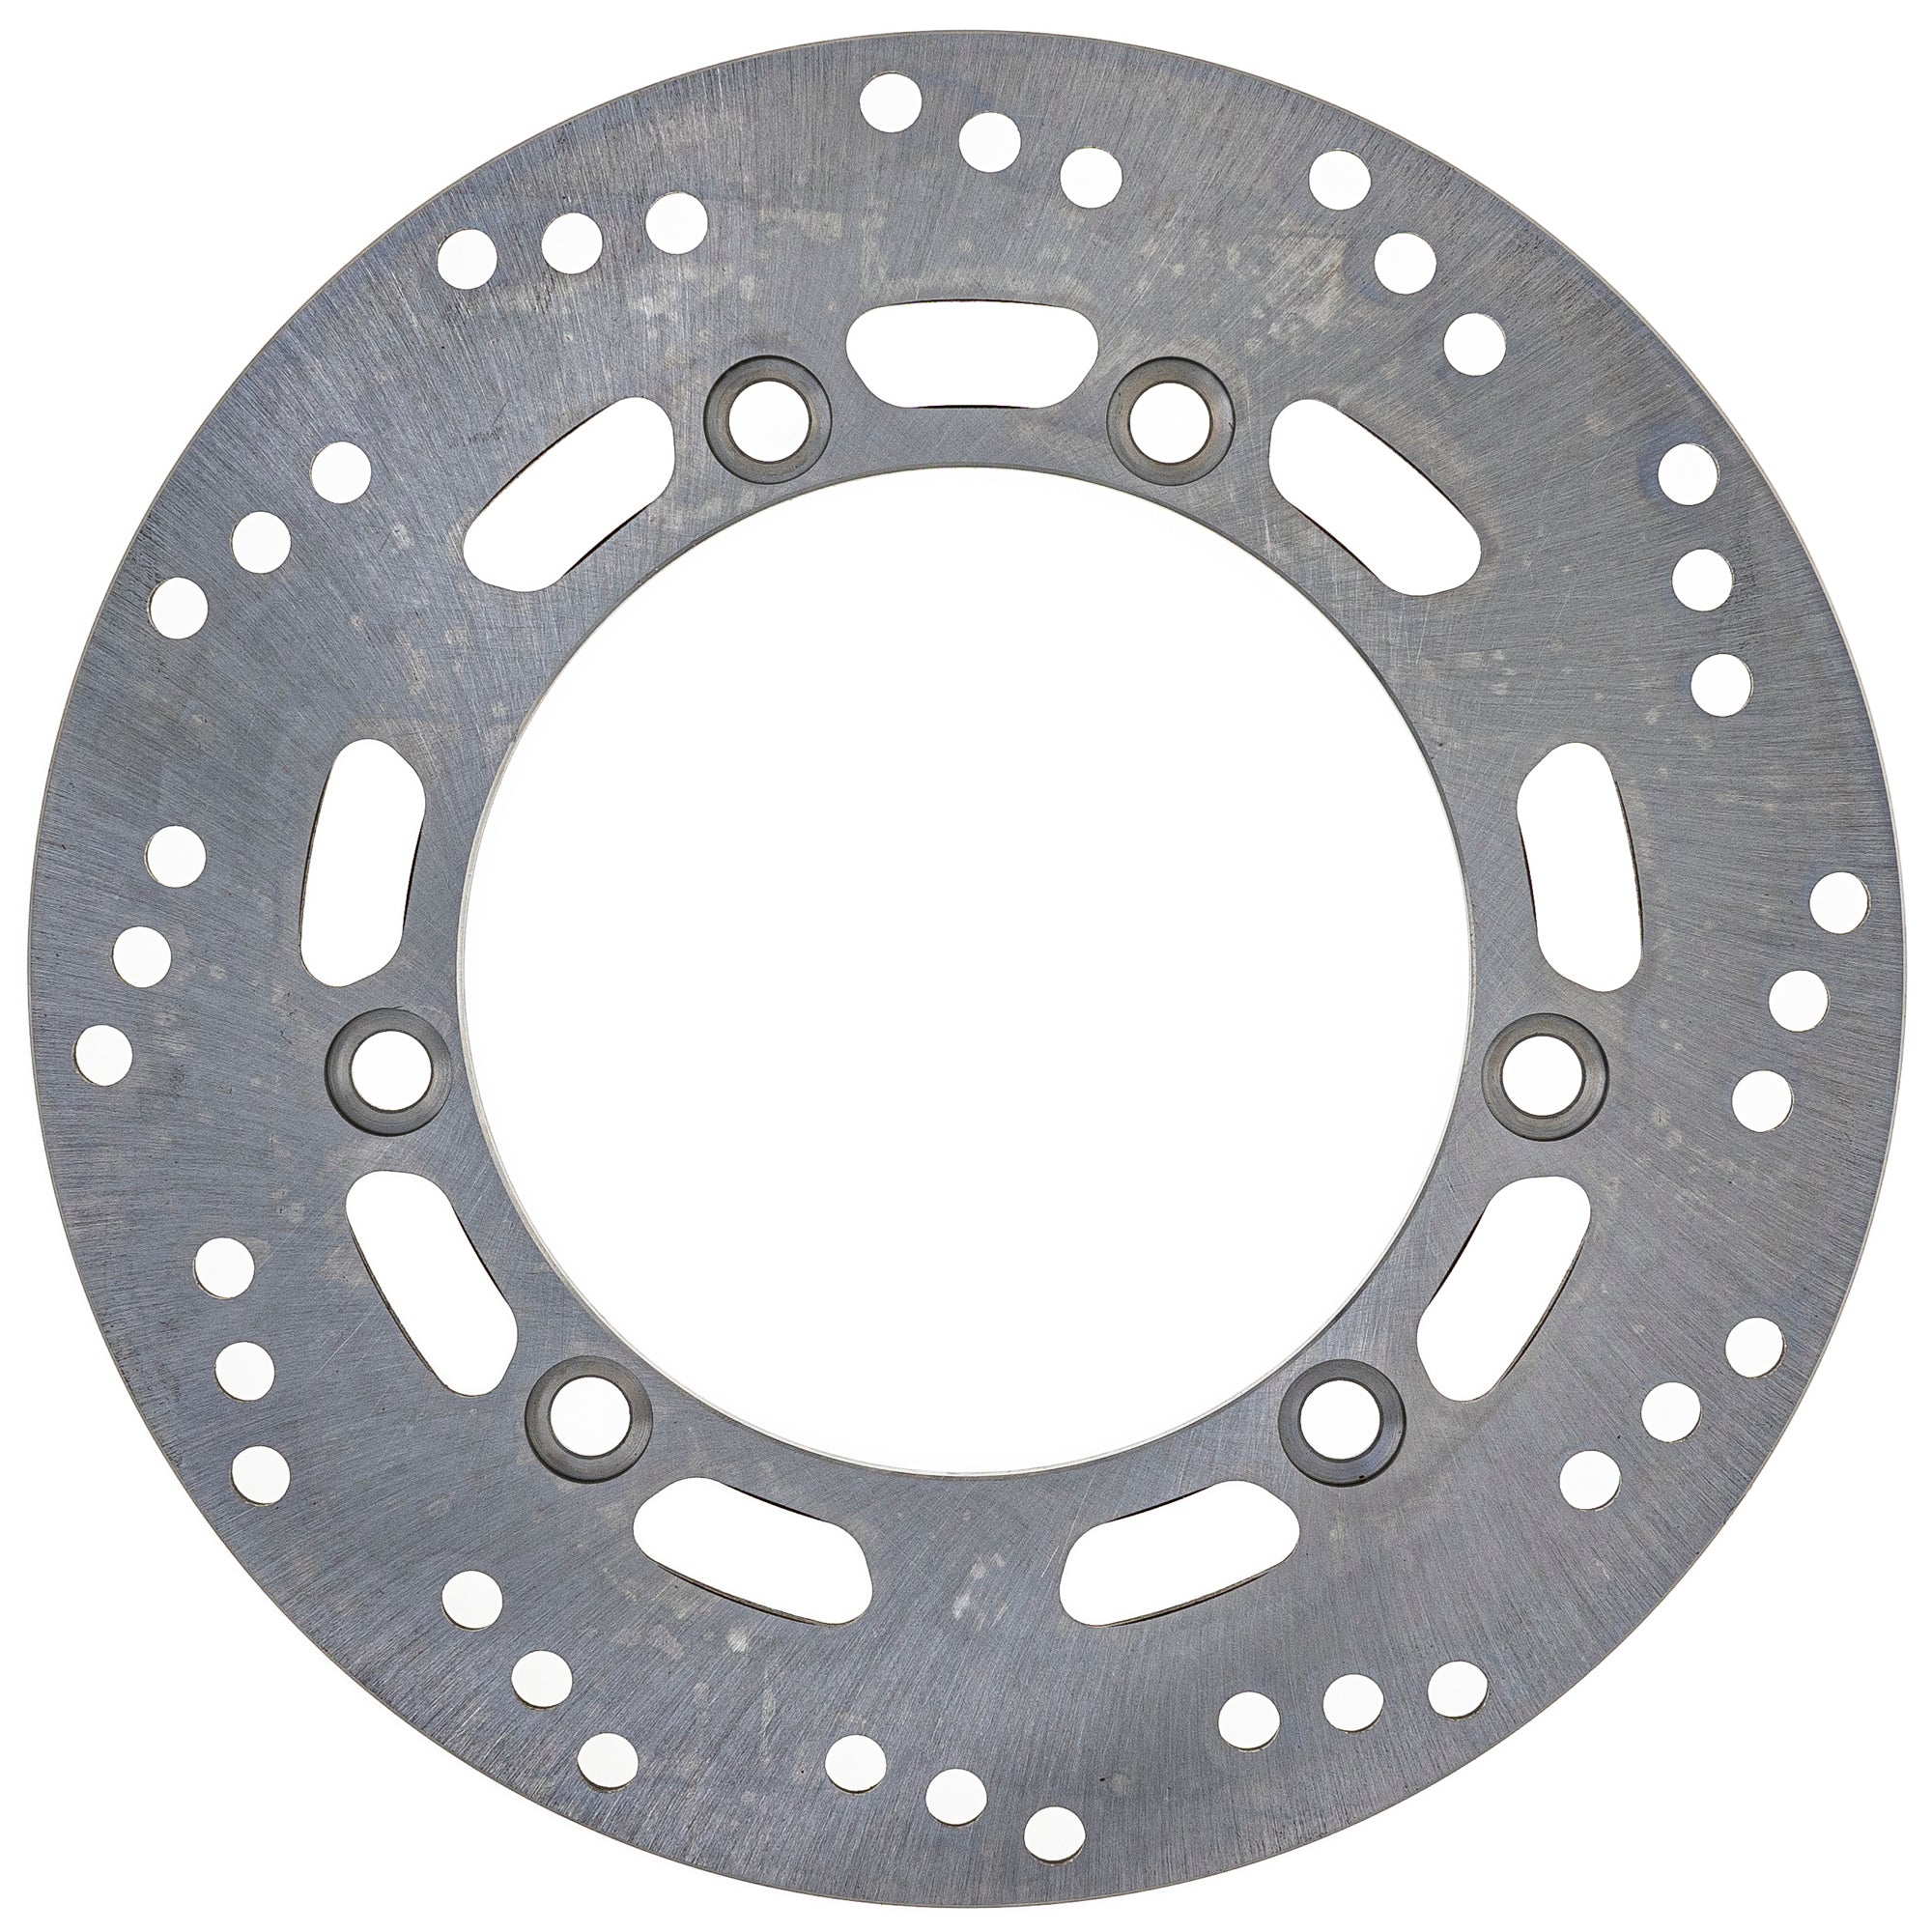 Rear Brake Rotor for zOTHER DR650SE DR650S NICHE 519-CRT2541R